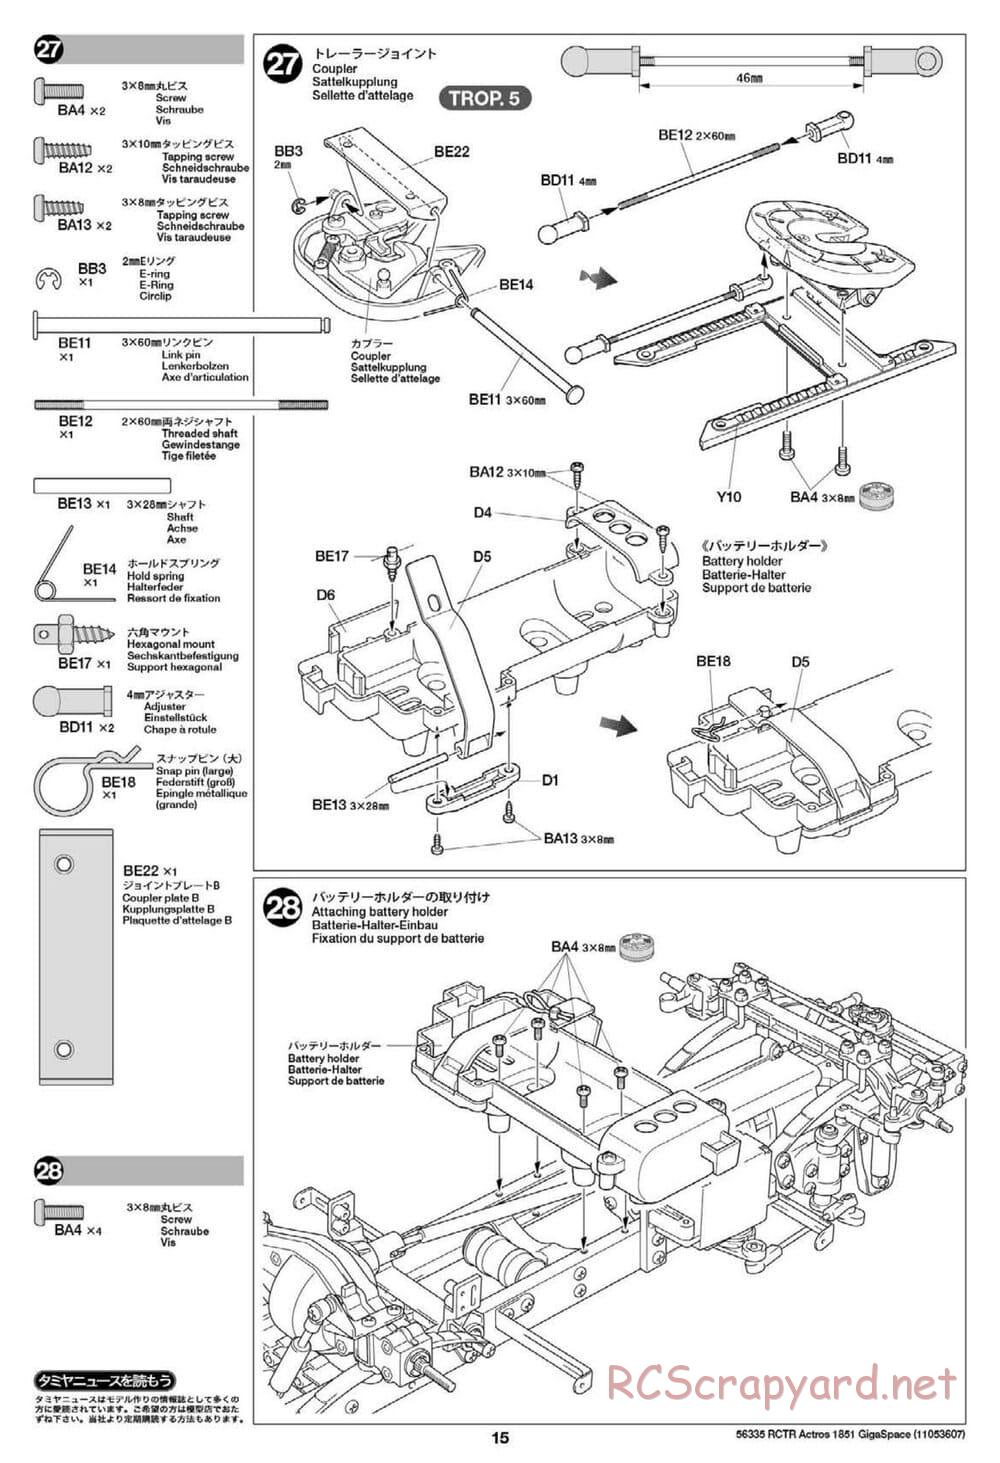 Tamiya - Mercedes-Benz Actros 1851 Gigaspace Tractor Truck Chassis - Manual - Page 15